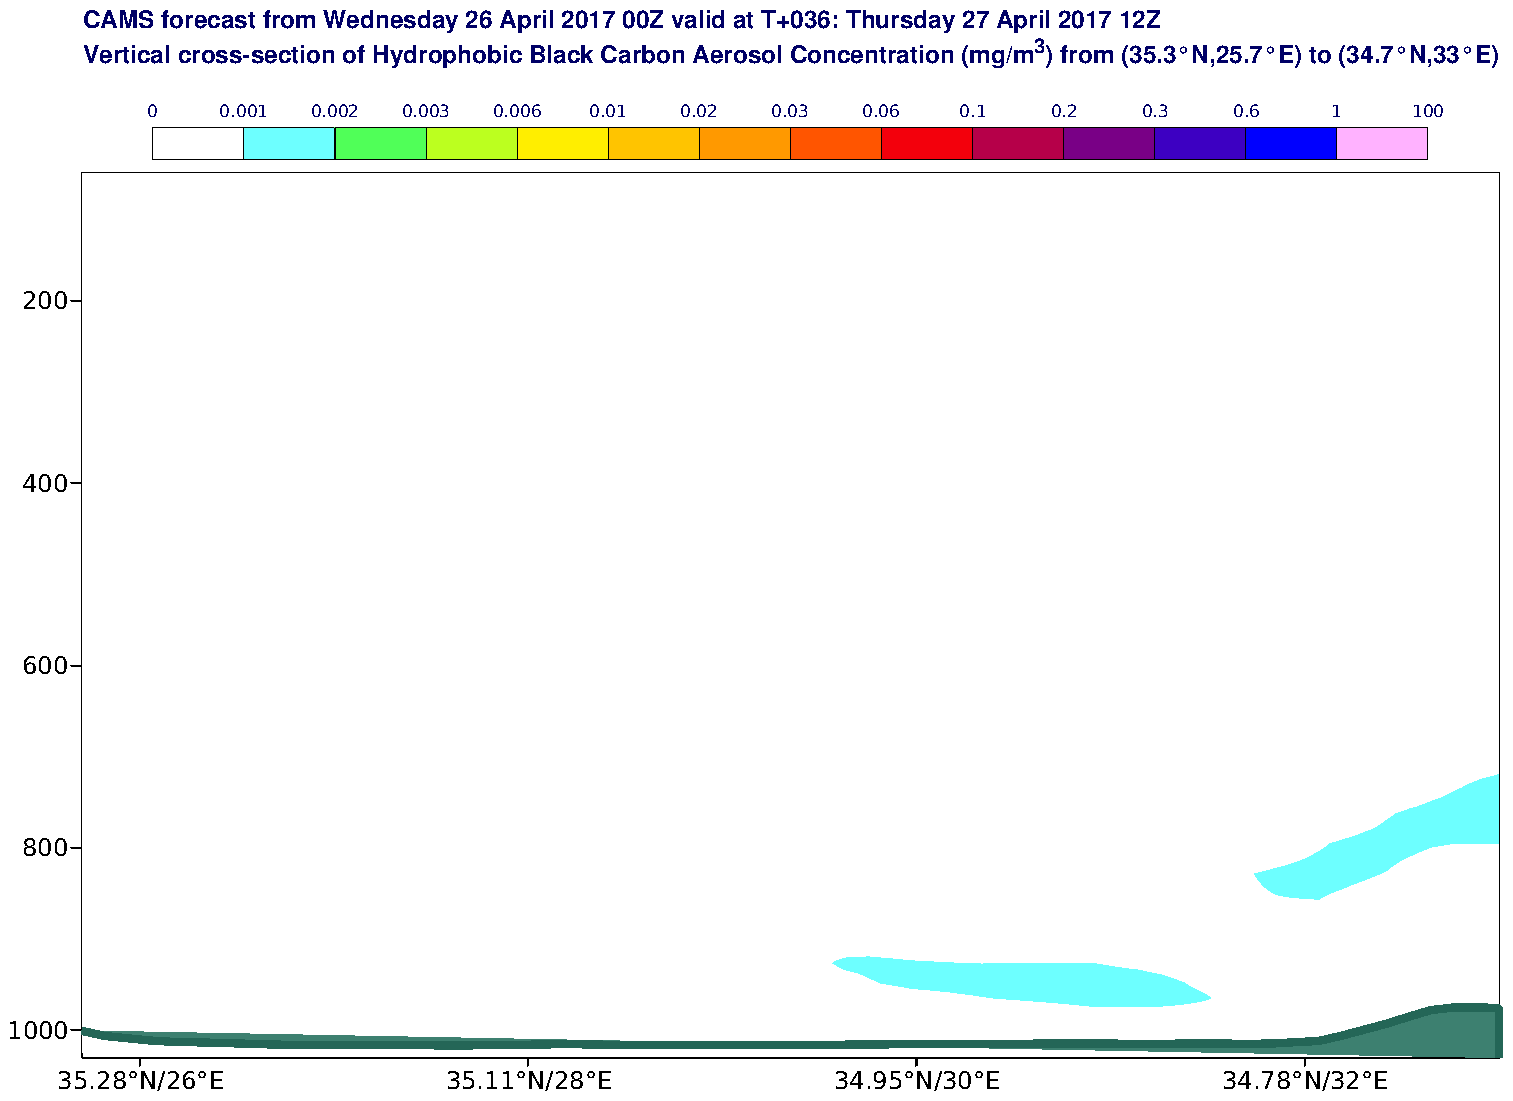 Vertical cross-section of Hydrophobic Black Carbon Aerosol Concentration (mg/m3) valid at T36 - 2017-04-27 12:00